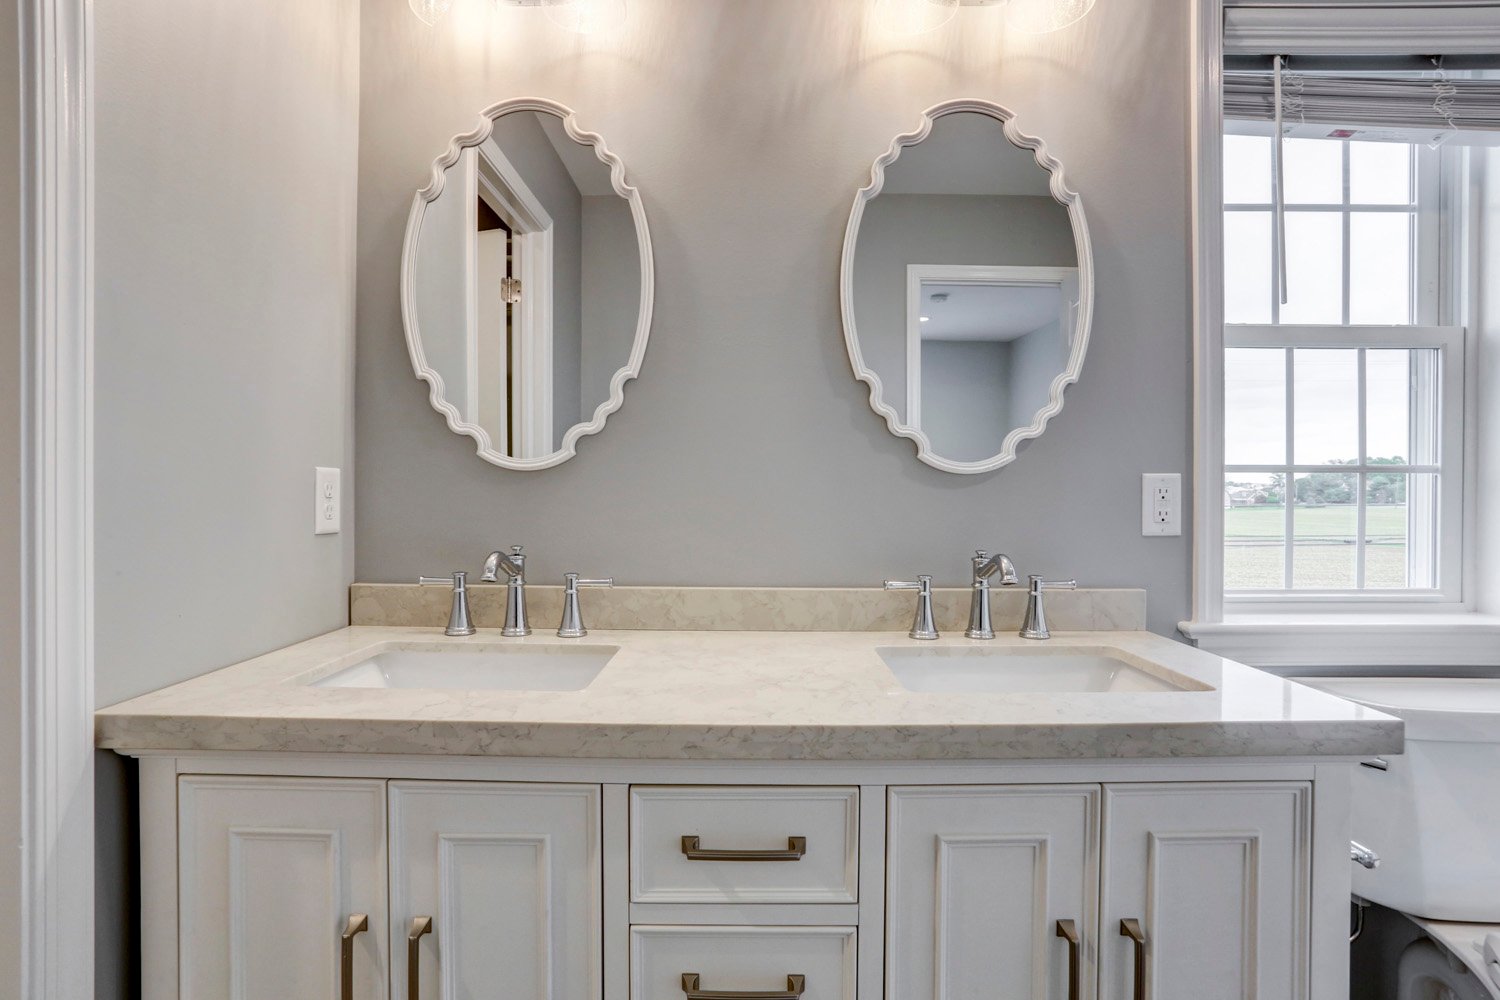 Leola Master Bathroom Addition with double vanity with white cabinets and intricate oval mirrors